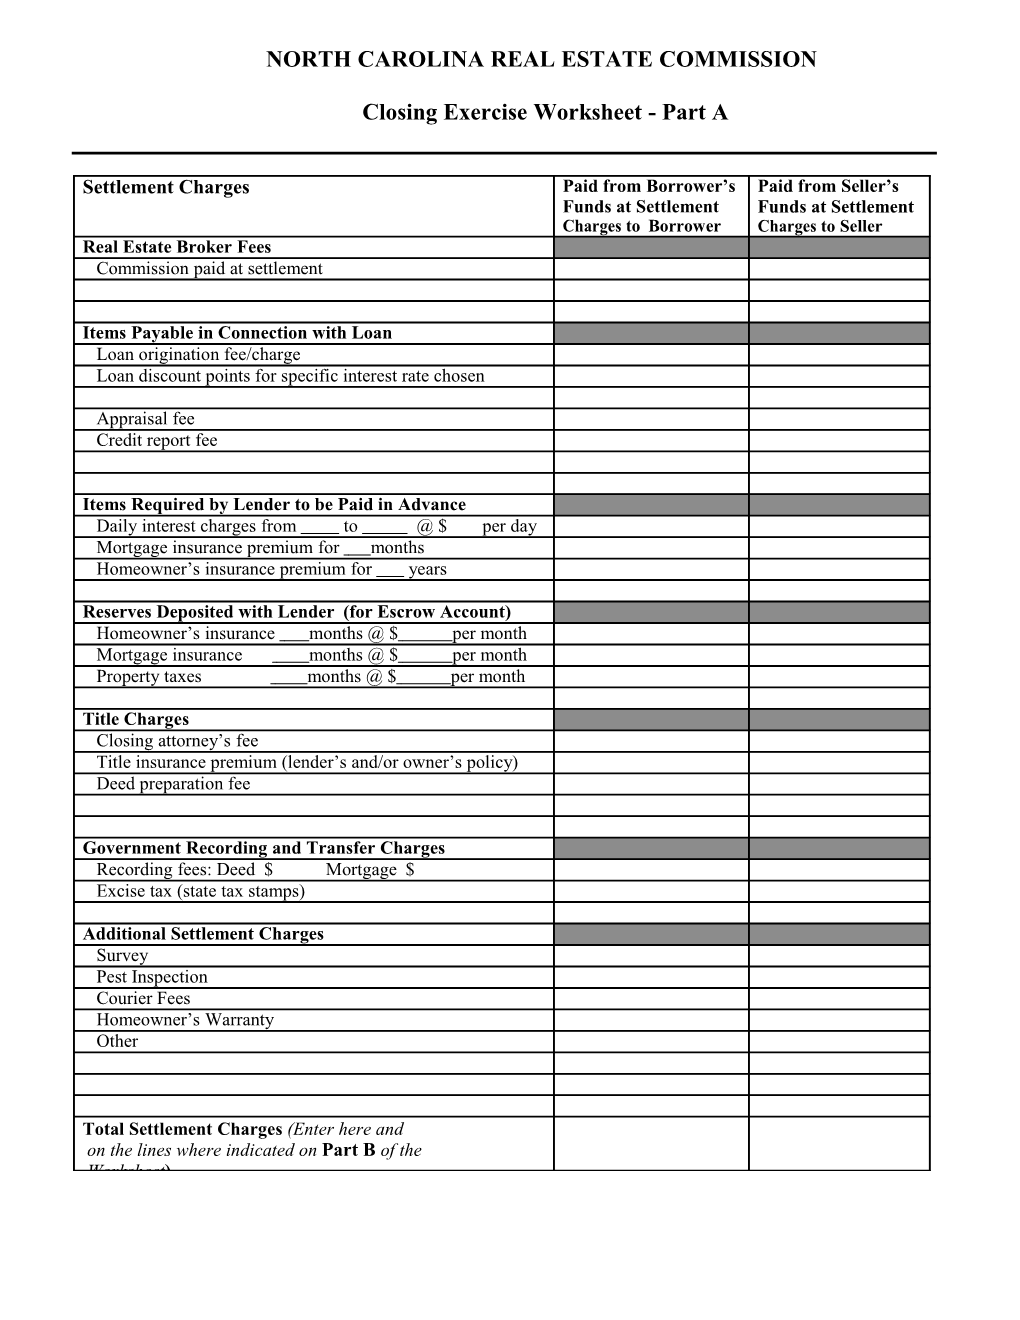 Closing Exercise Worksheet - Part A